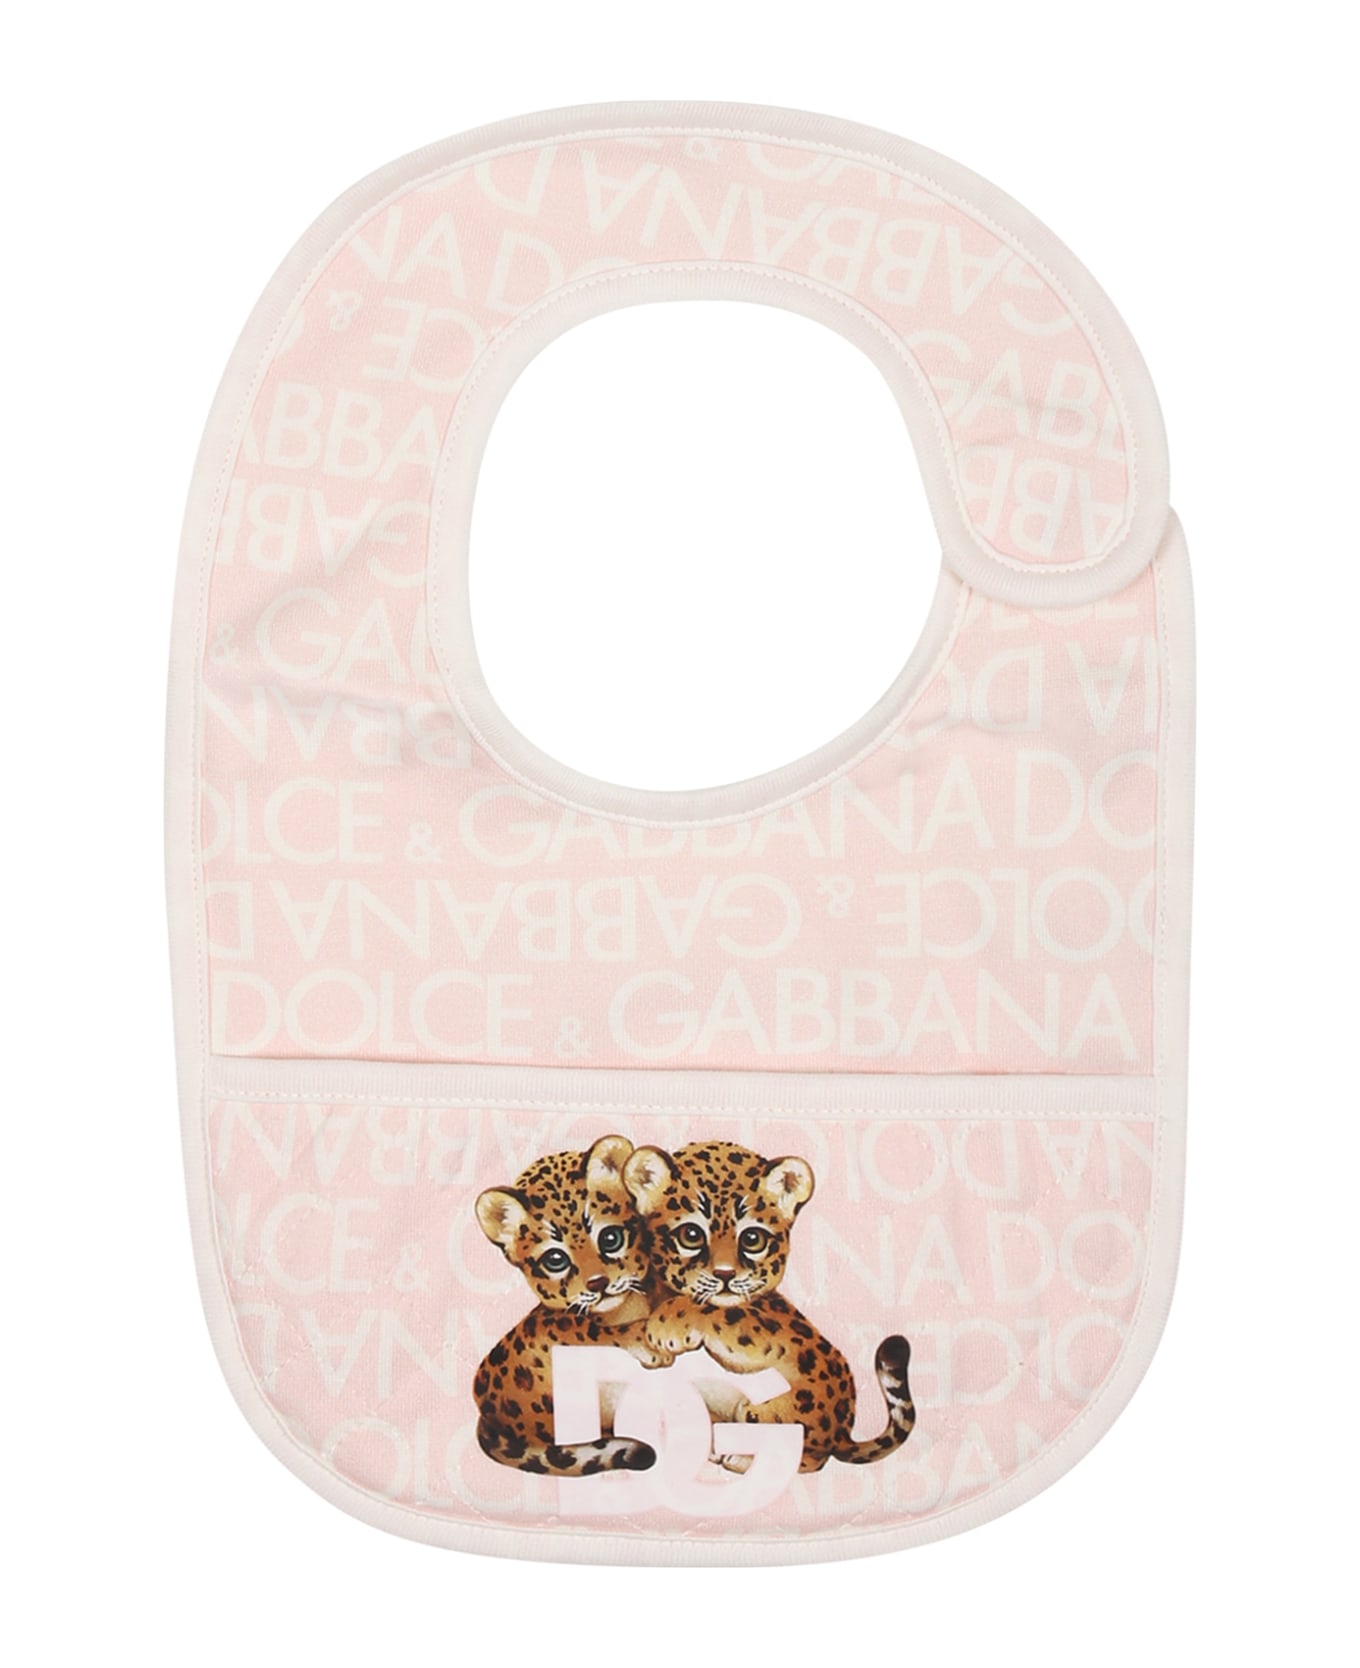 Dolce & Gabbana Pink Set For Baby Girl With Logo And Leoaprds - Pink ボディスーツ＆セットアップ